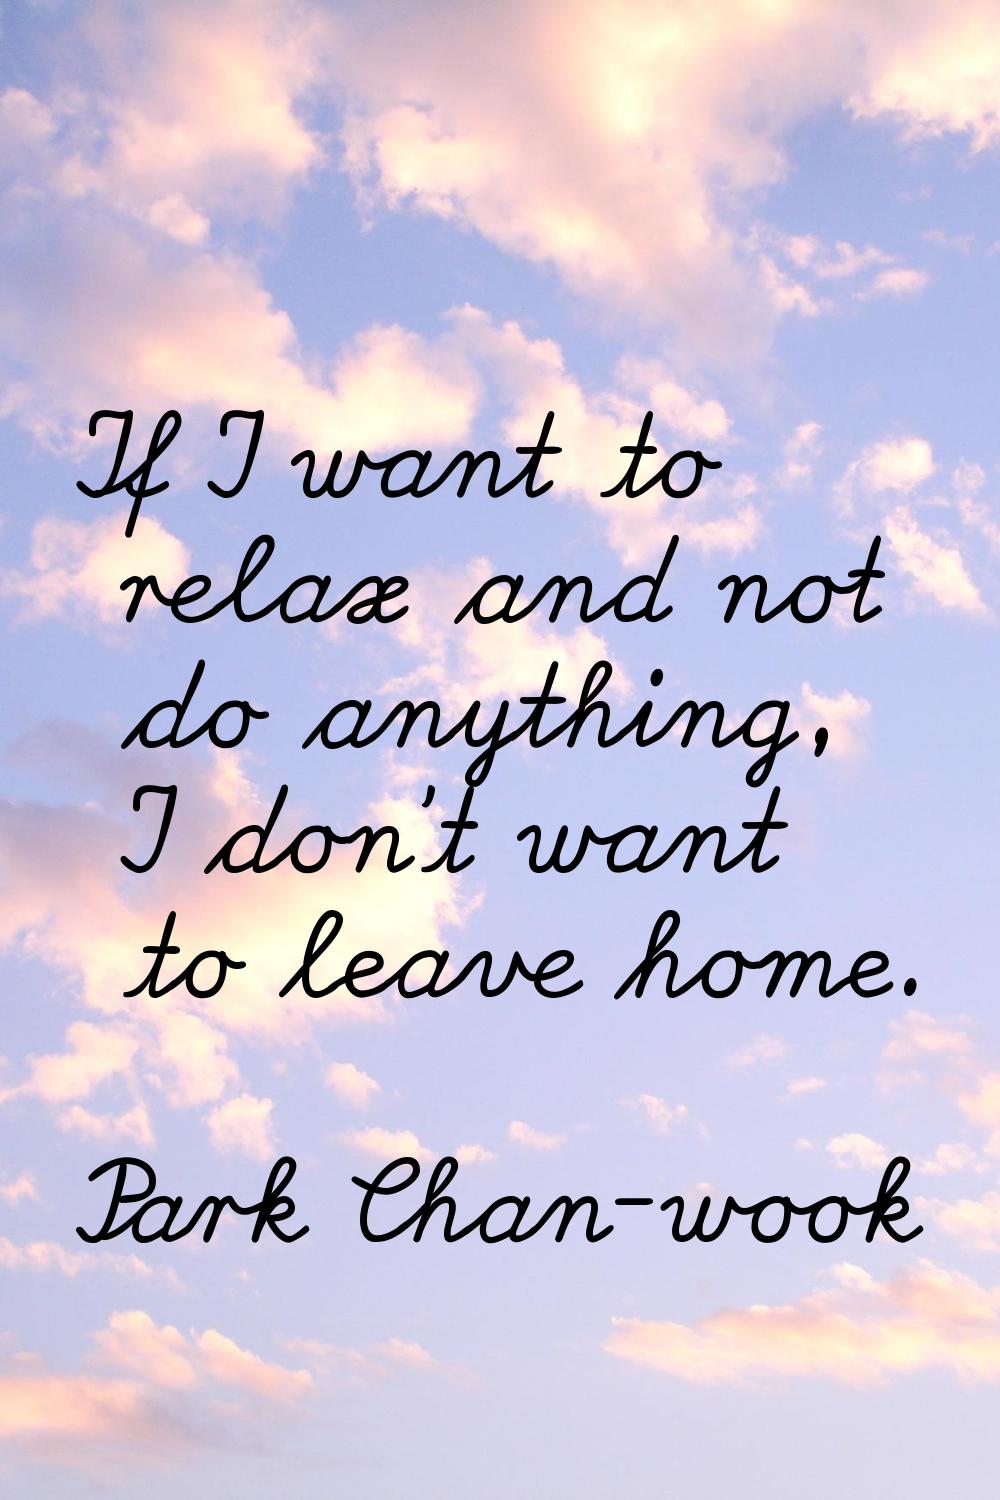 If I want to relax and not do anything, I don't want to leave home.